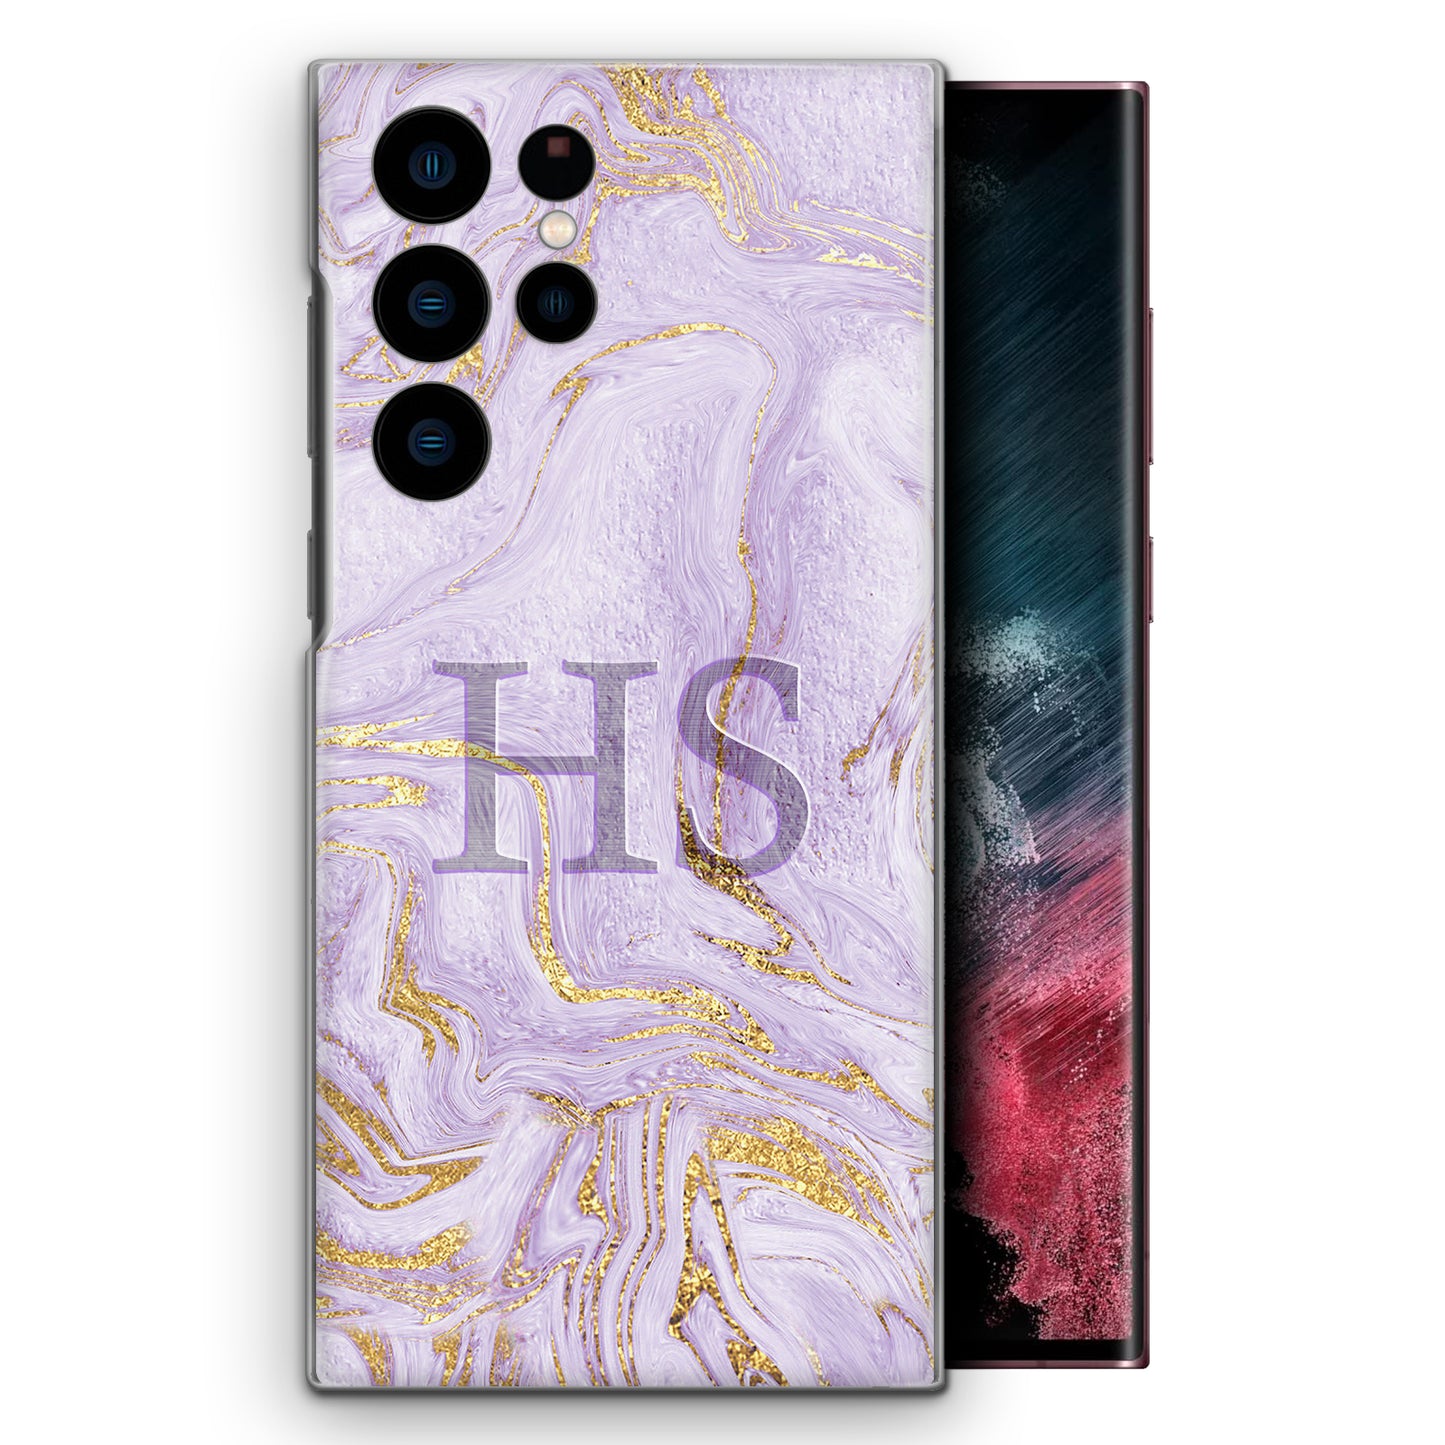 Personalised Samsung Phone Hard Case with Soft Block Initials on Lilac and Gold Marble